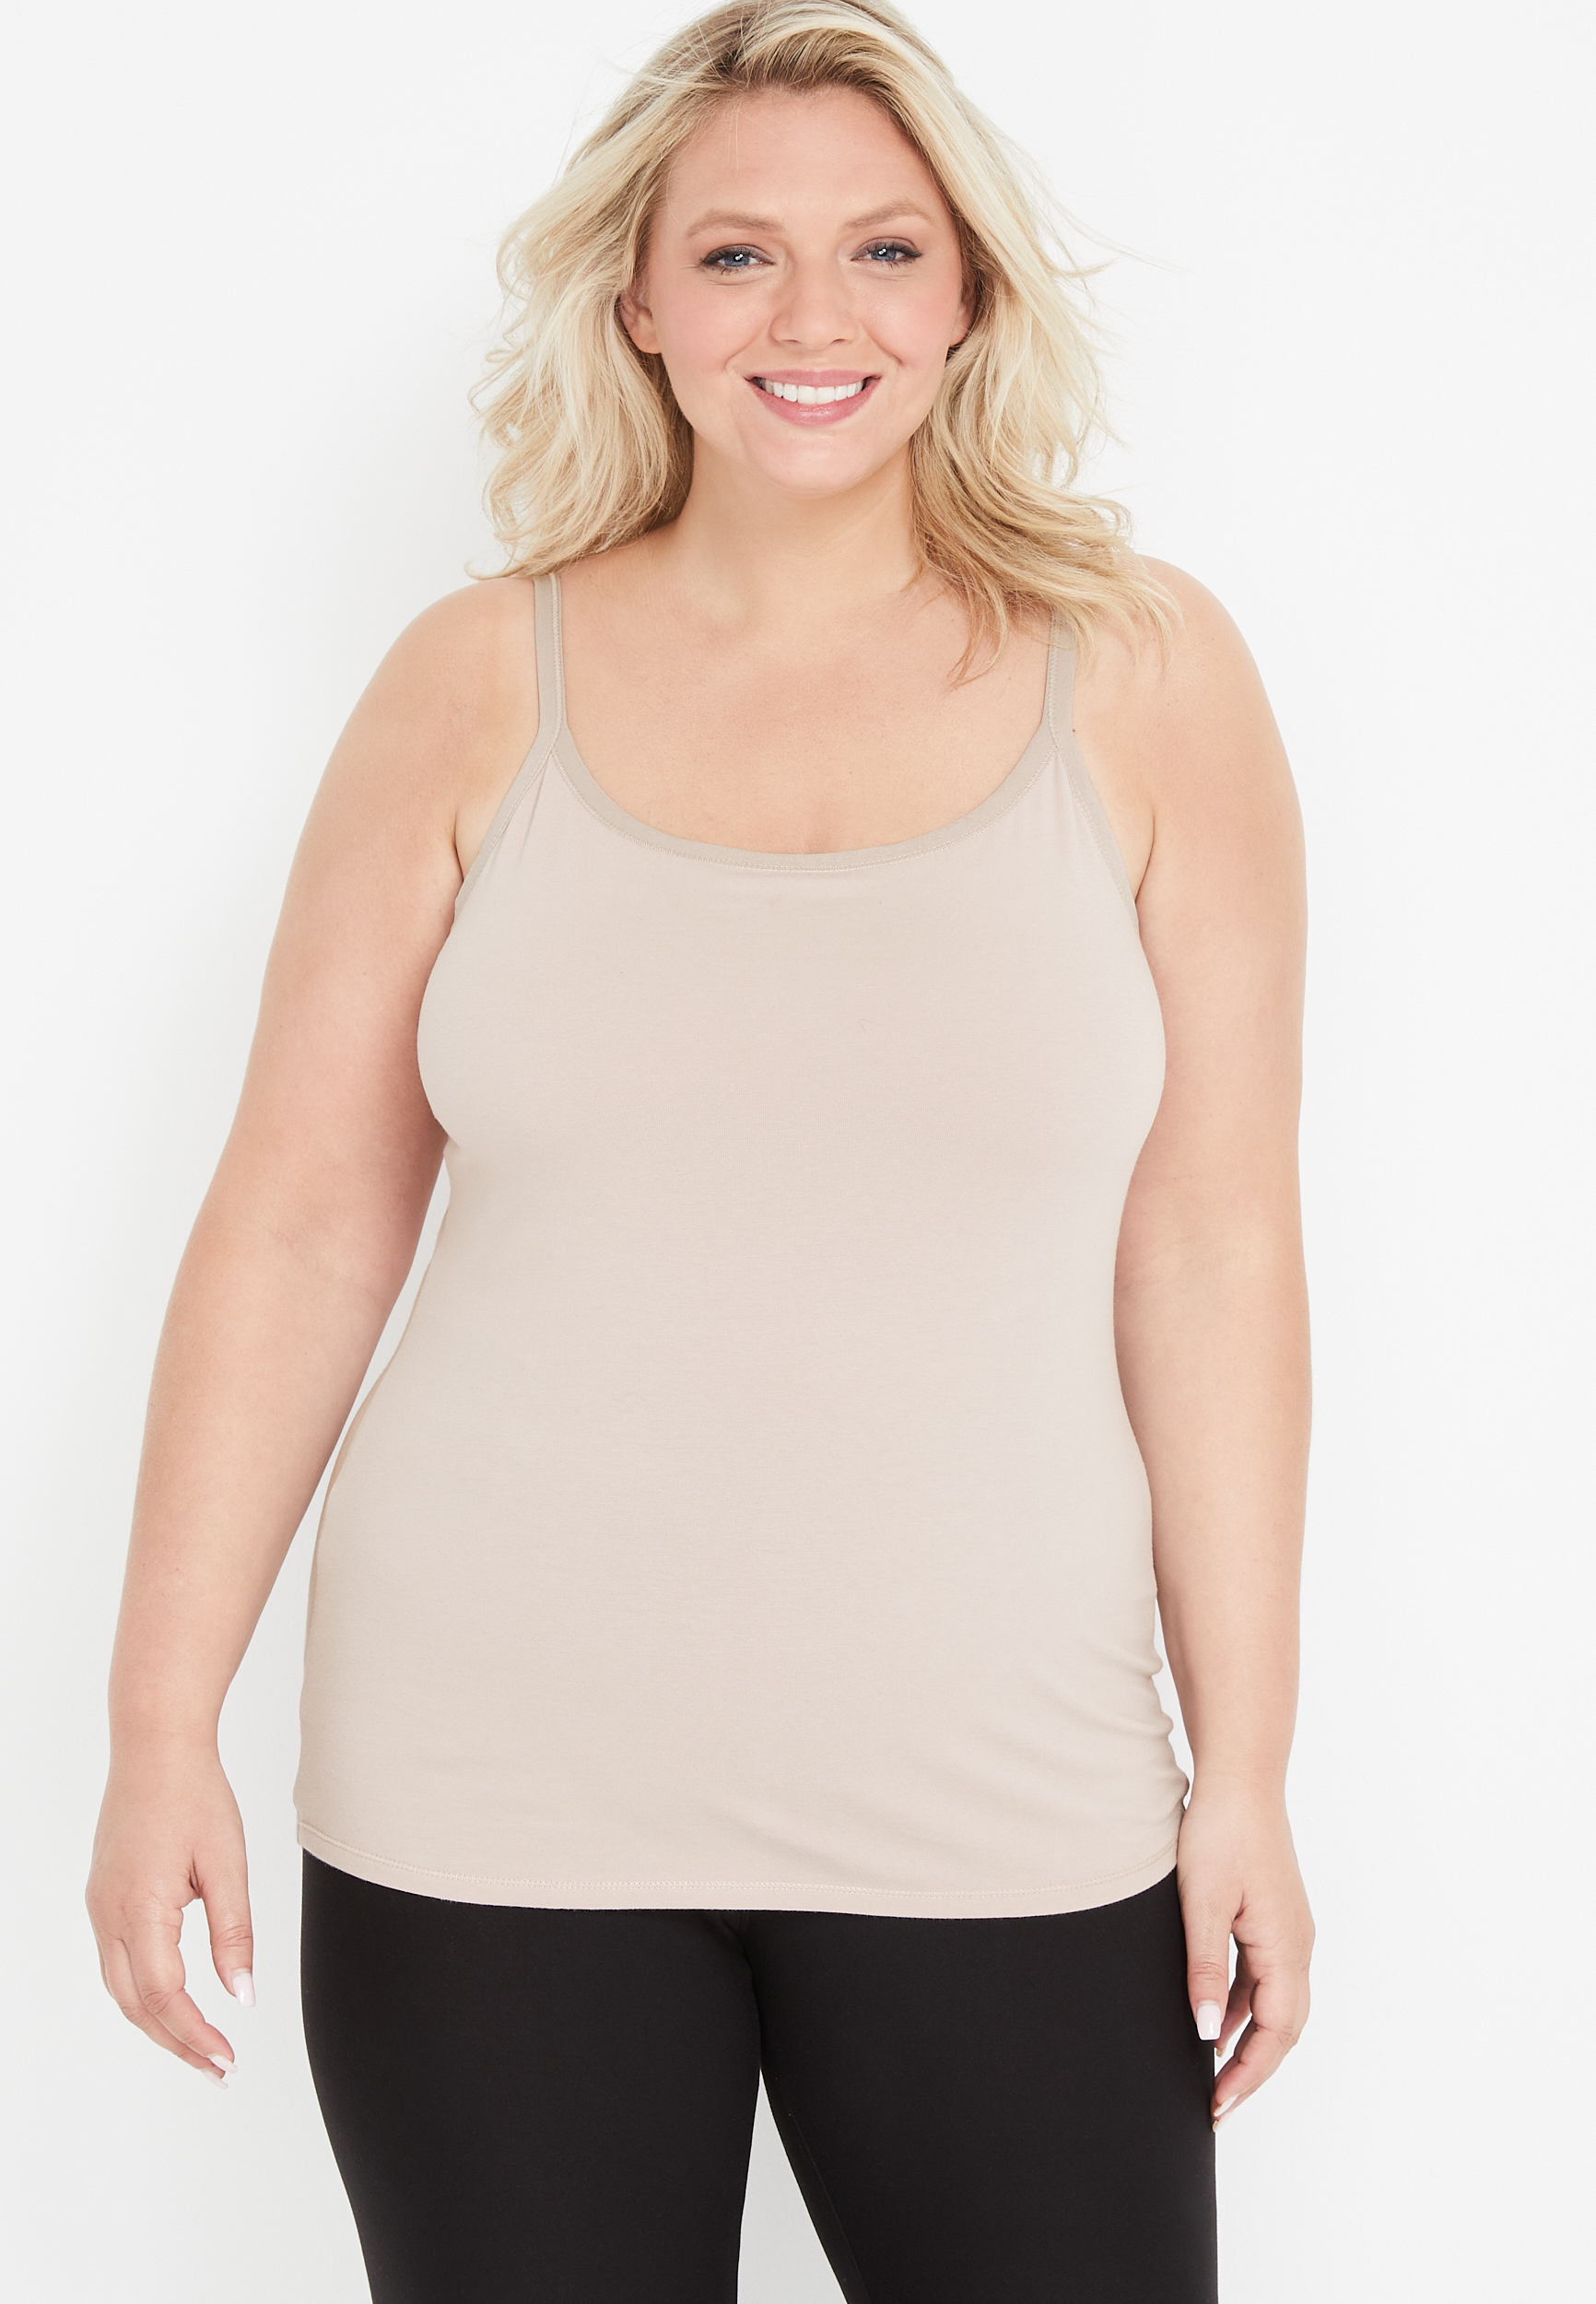 Plus Size Workout Flowy Loose Fit Tank Tops with Built in Bra